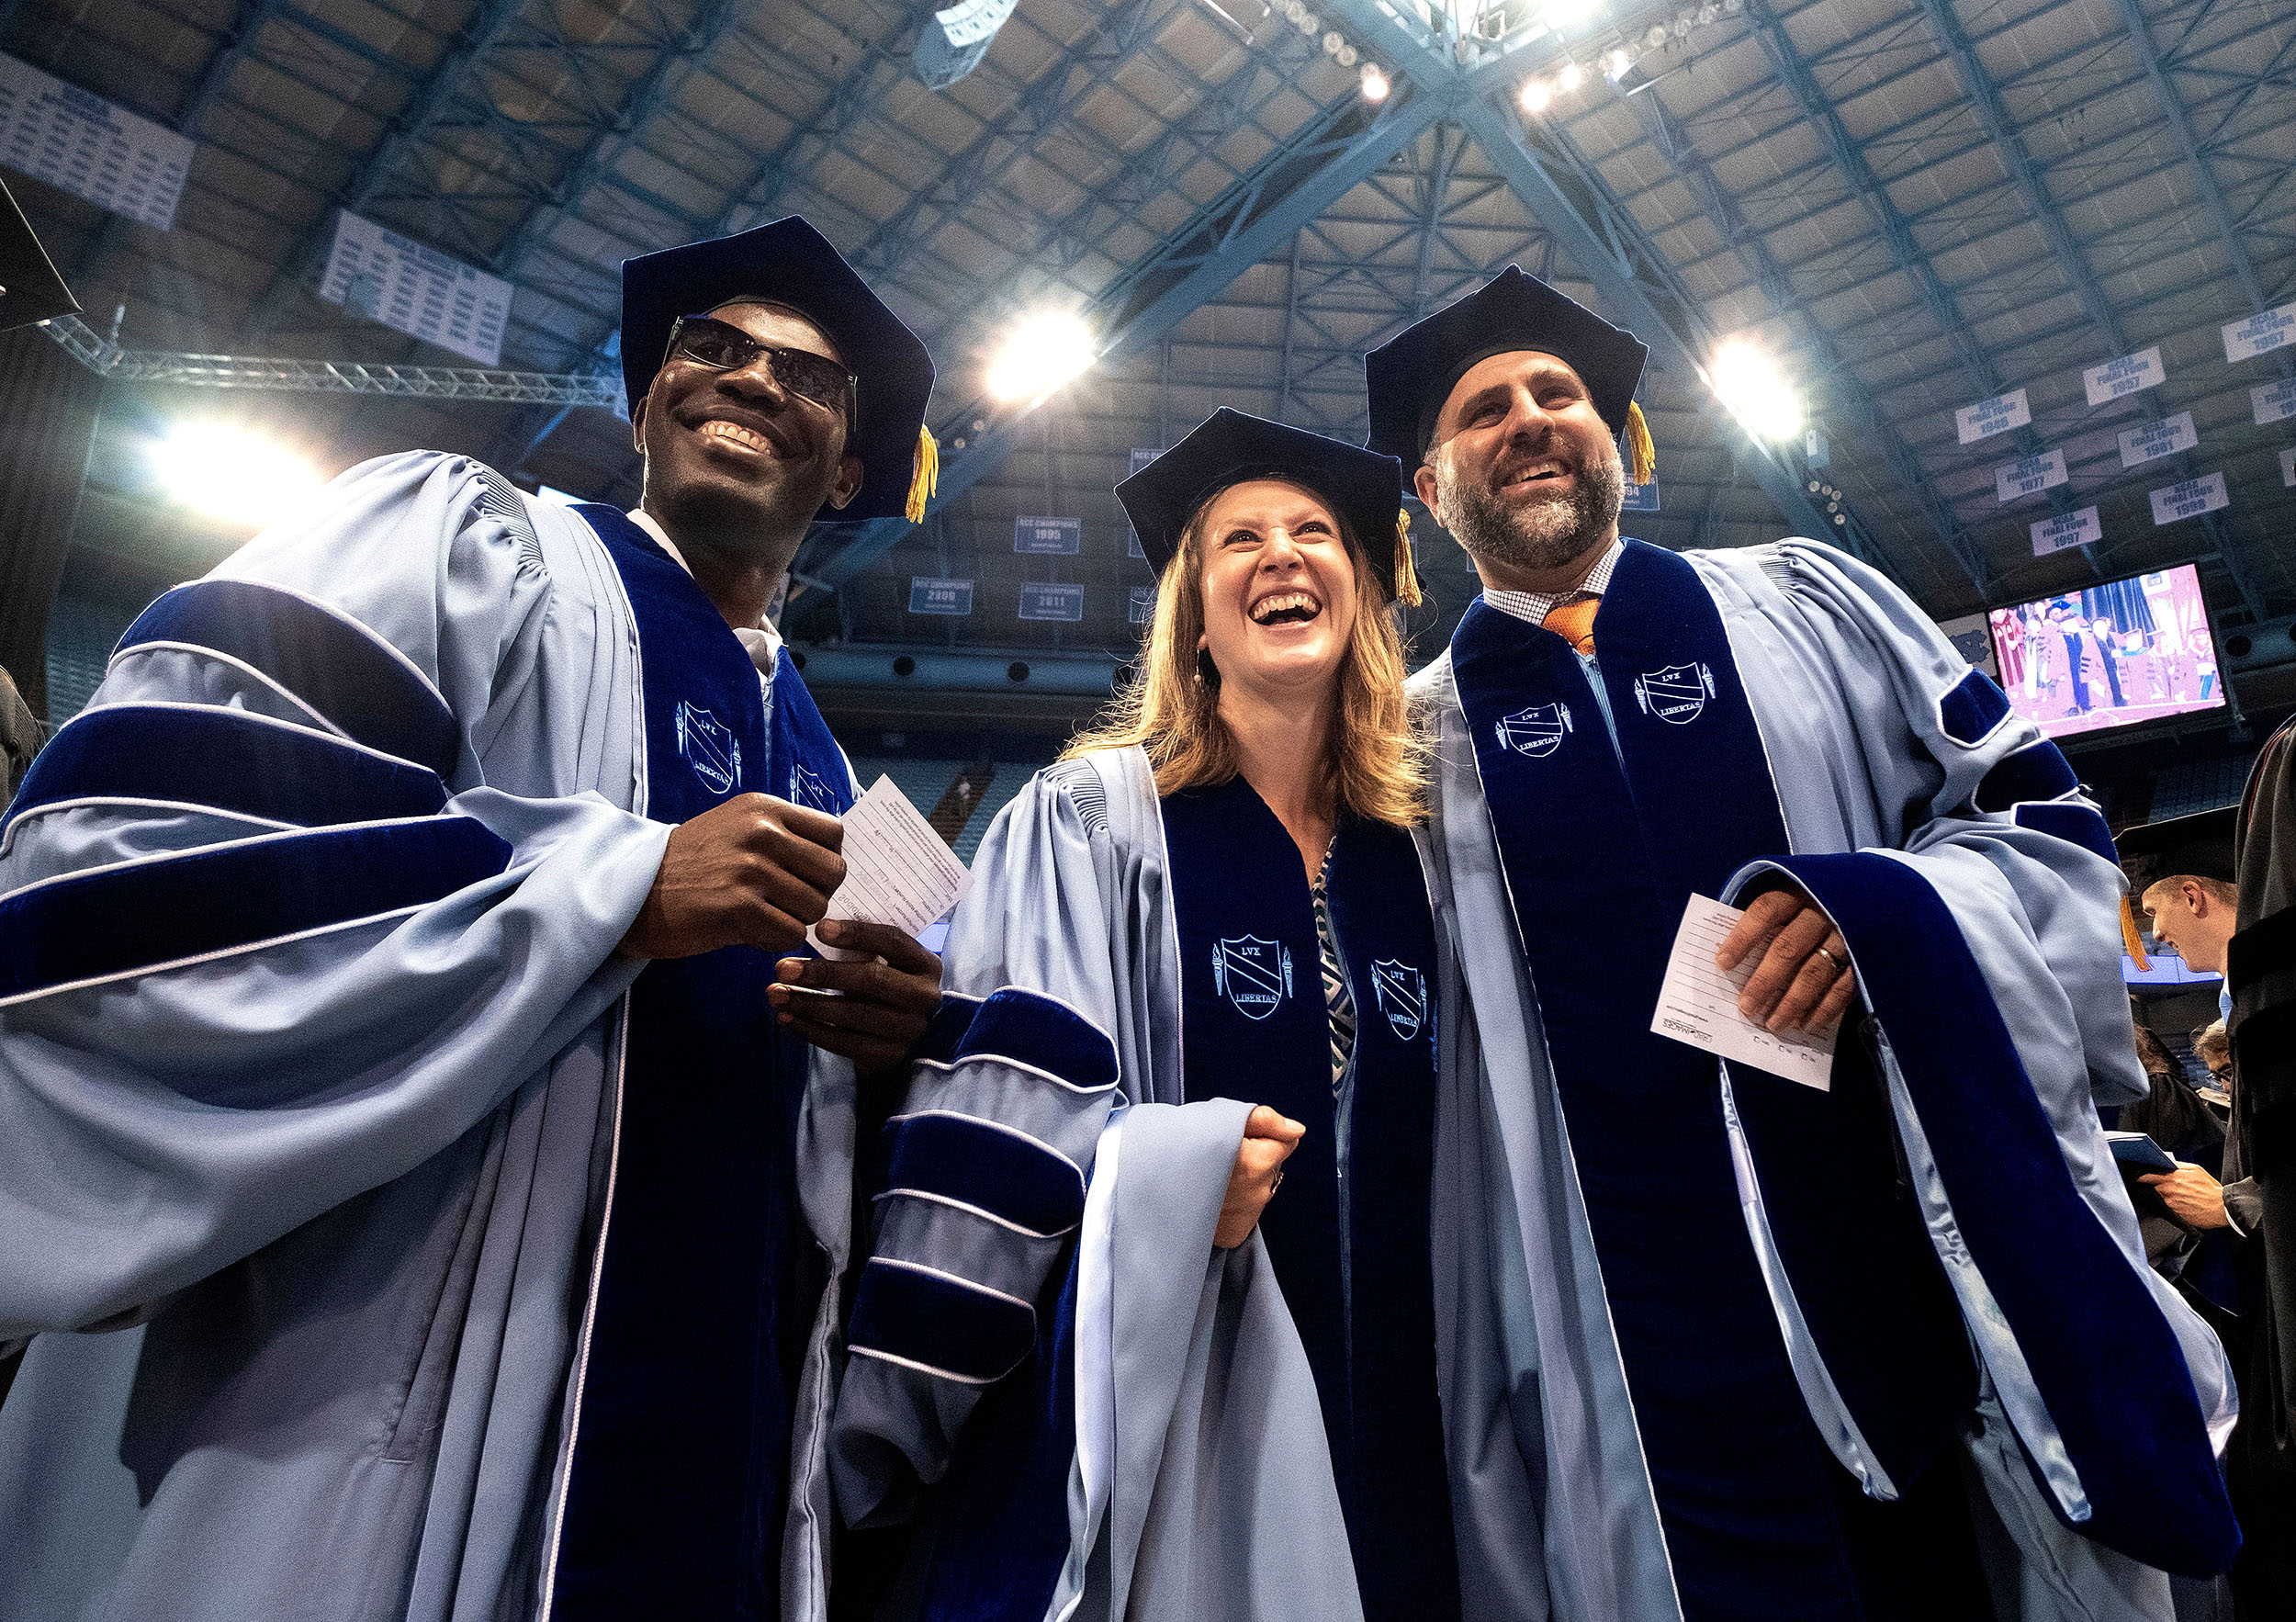 Doctoral Hooding ceremony held May 12, 2018 at the Dean Smith Center on the campus of the University of North Carolina at Chapel Hill. <